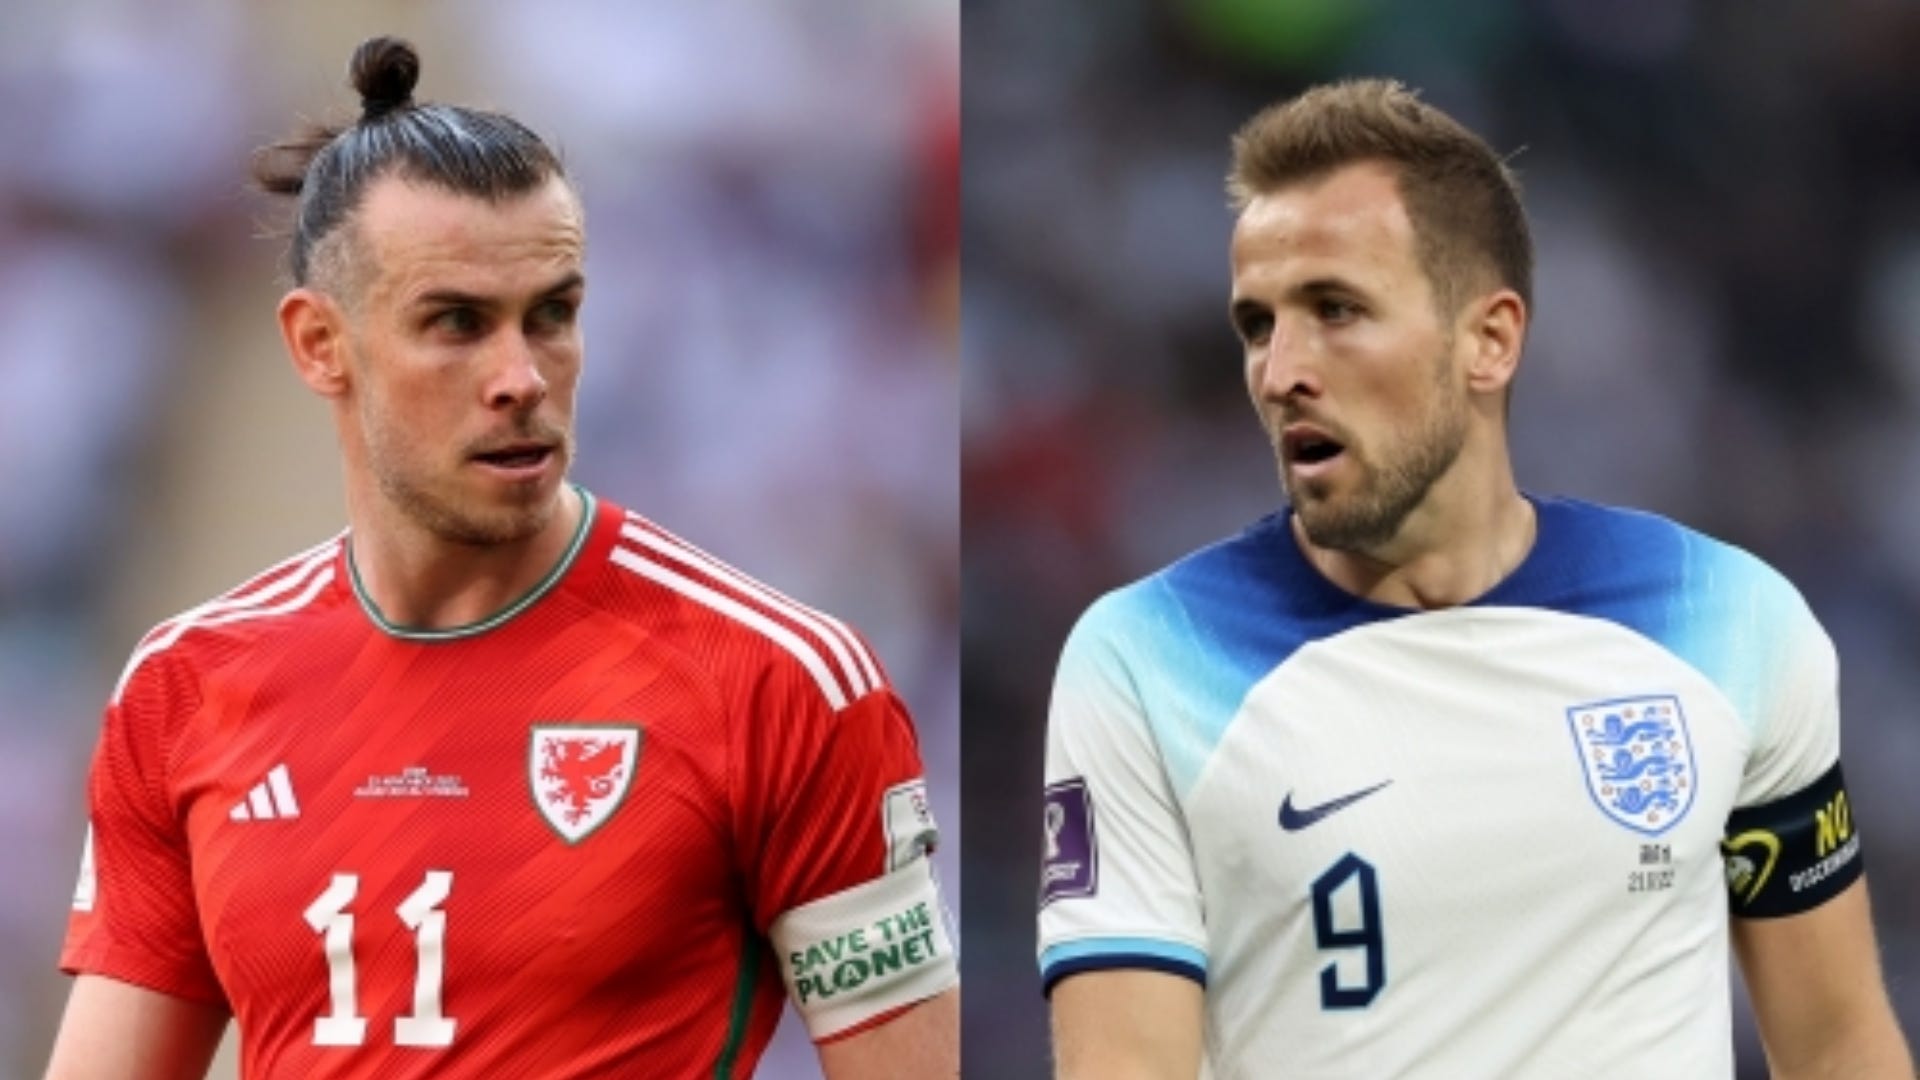 Wales vs England Live stream, TV channel, kick-off time and where to watch Goal